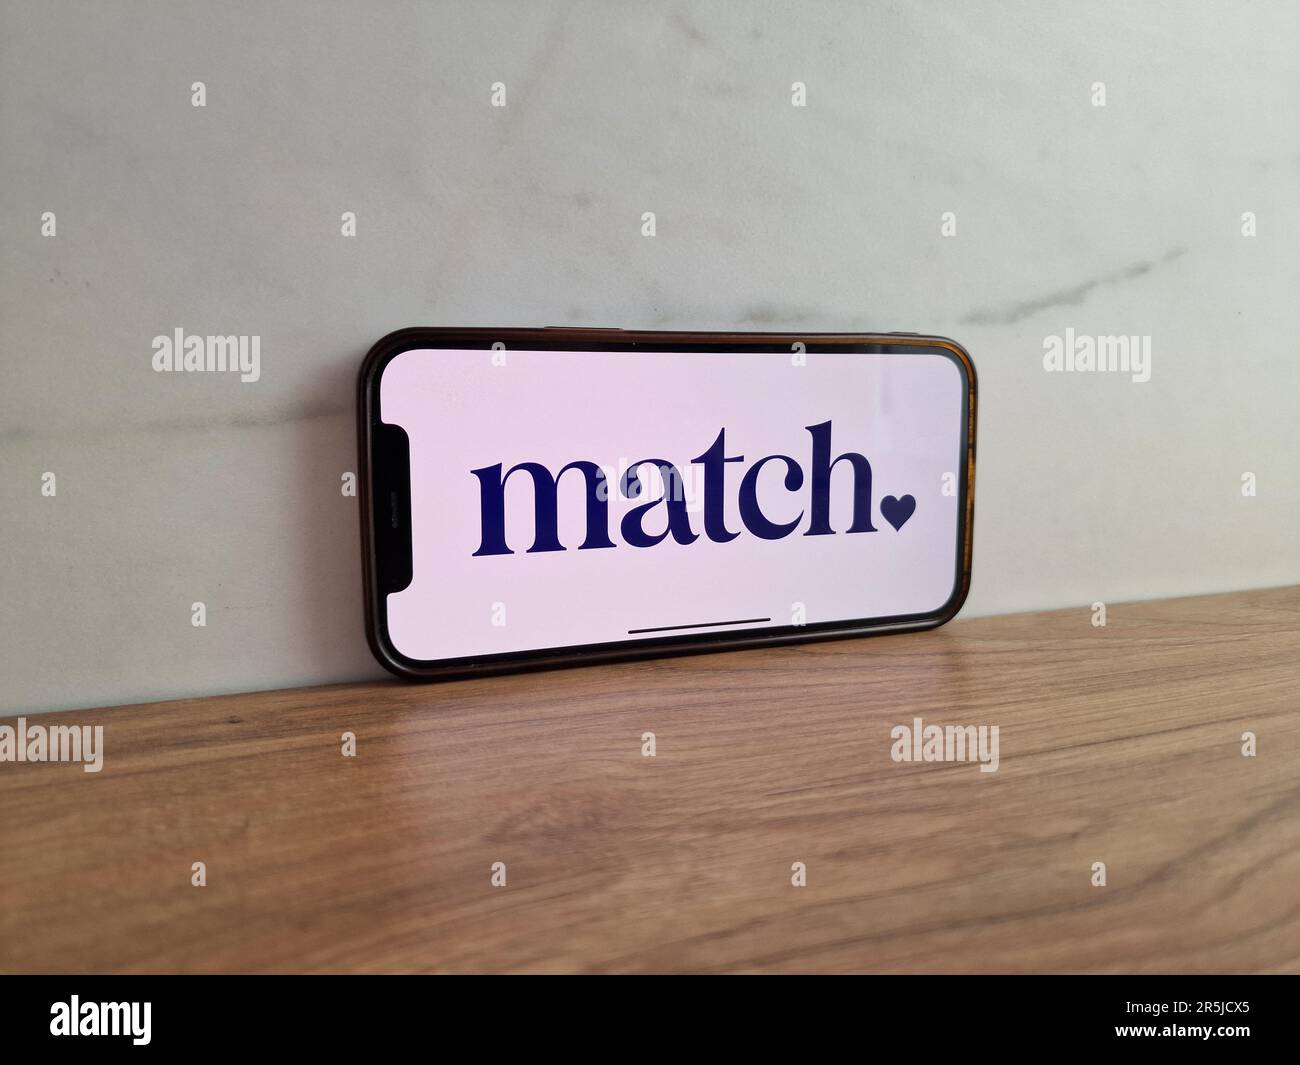 Konskie, Poland - May 28, 2023: Match dating website logo displayed on mobile phone screen Stock Photo